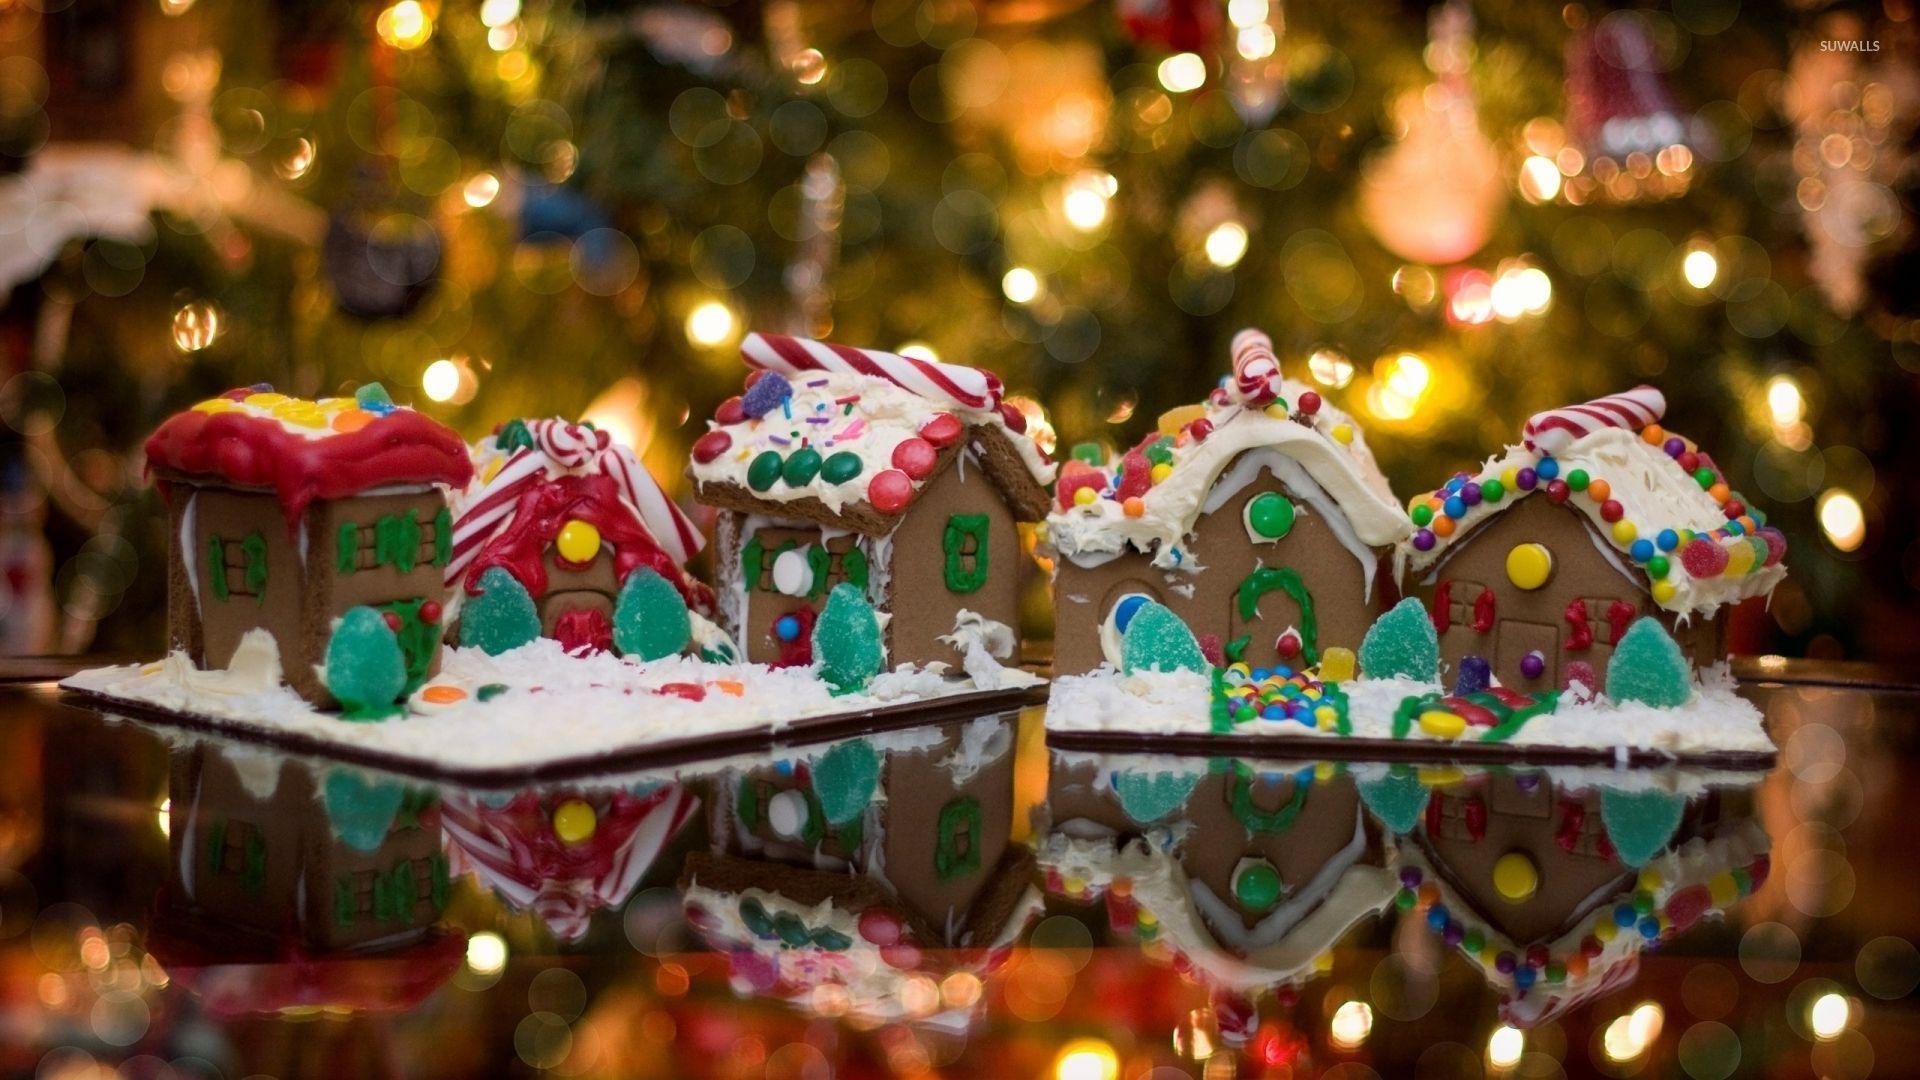 Gingerbread House Wallpapers 53 images inside